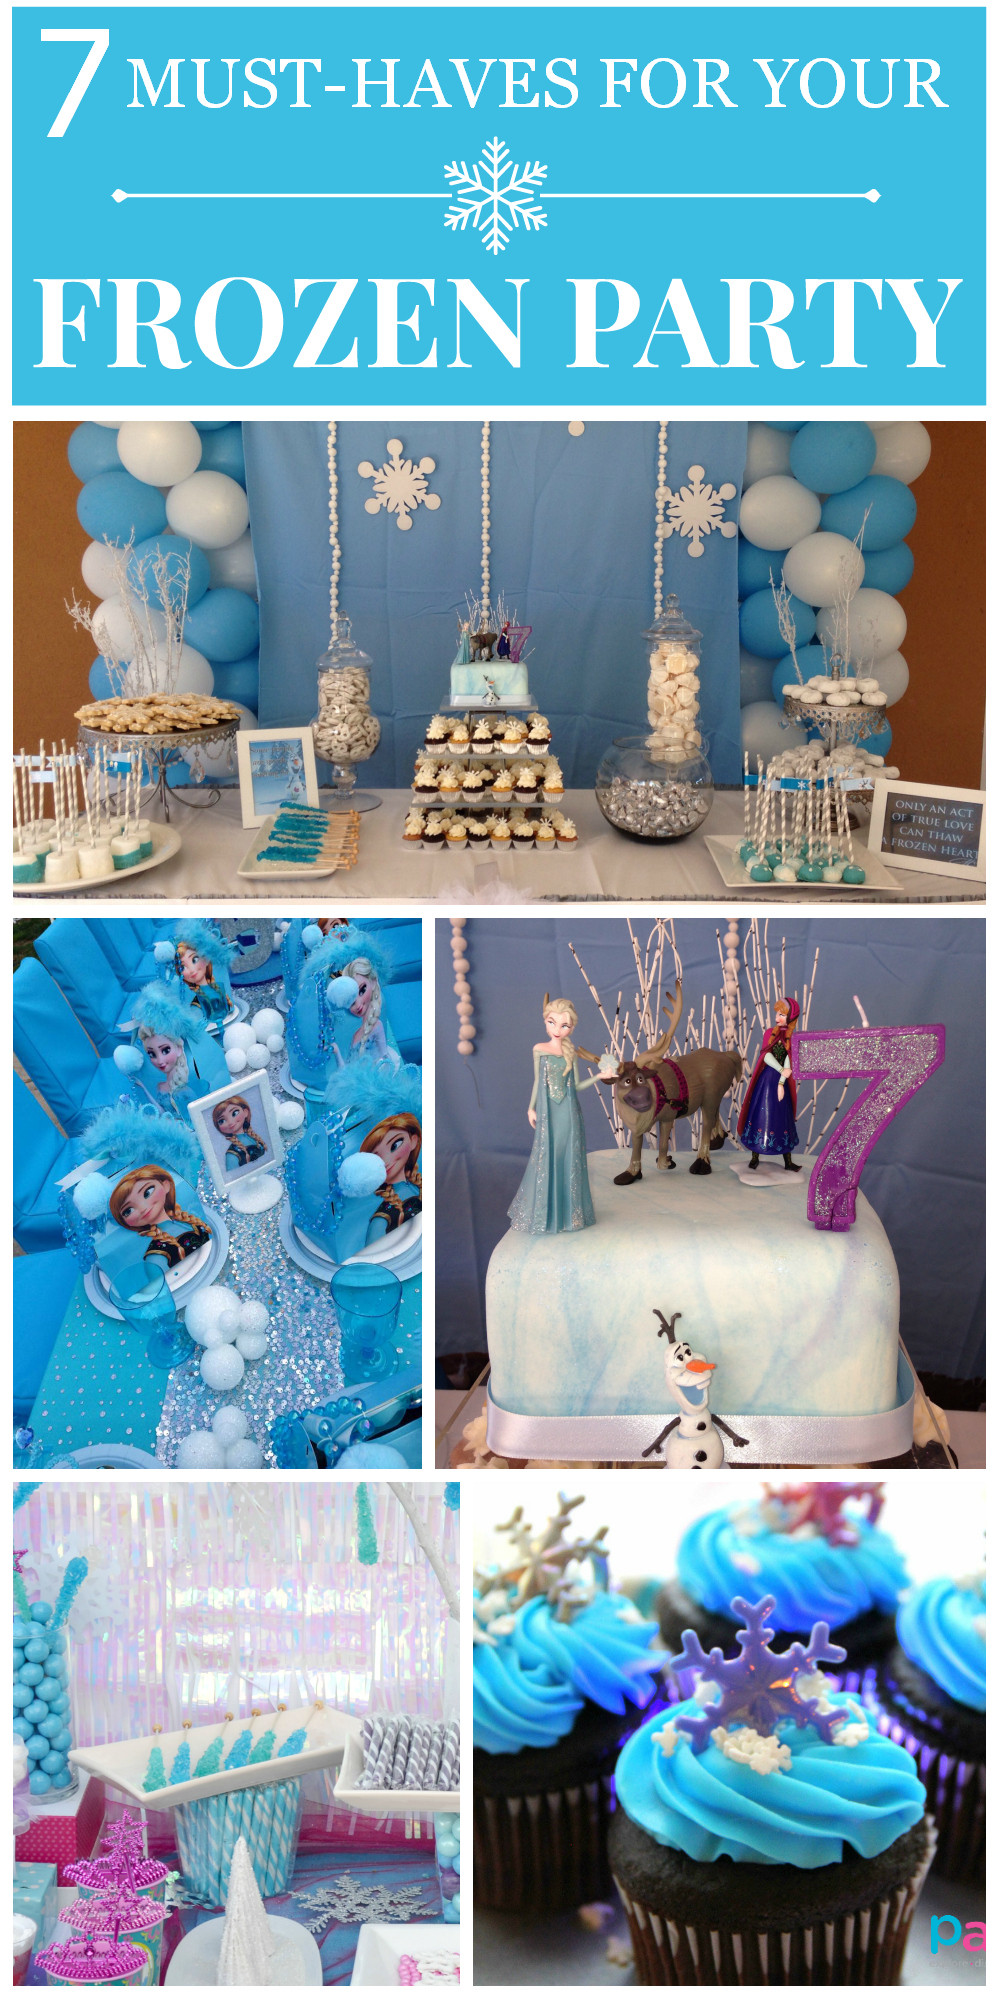 Frozen Birthday Party Ideas
 7 Things You Must Have at Your Frozen Party